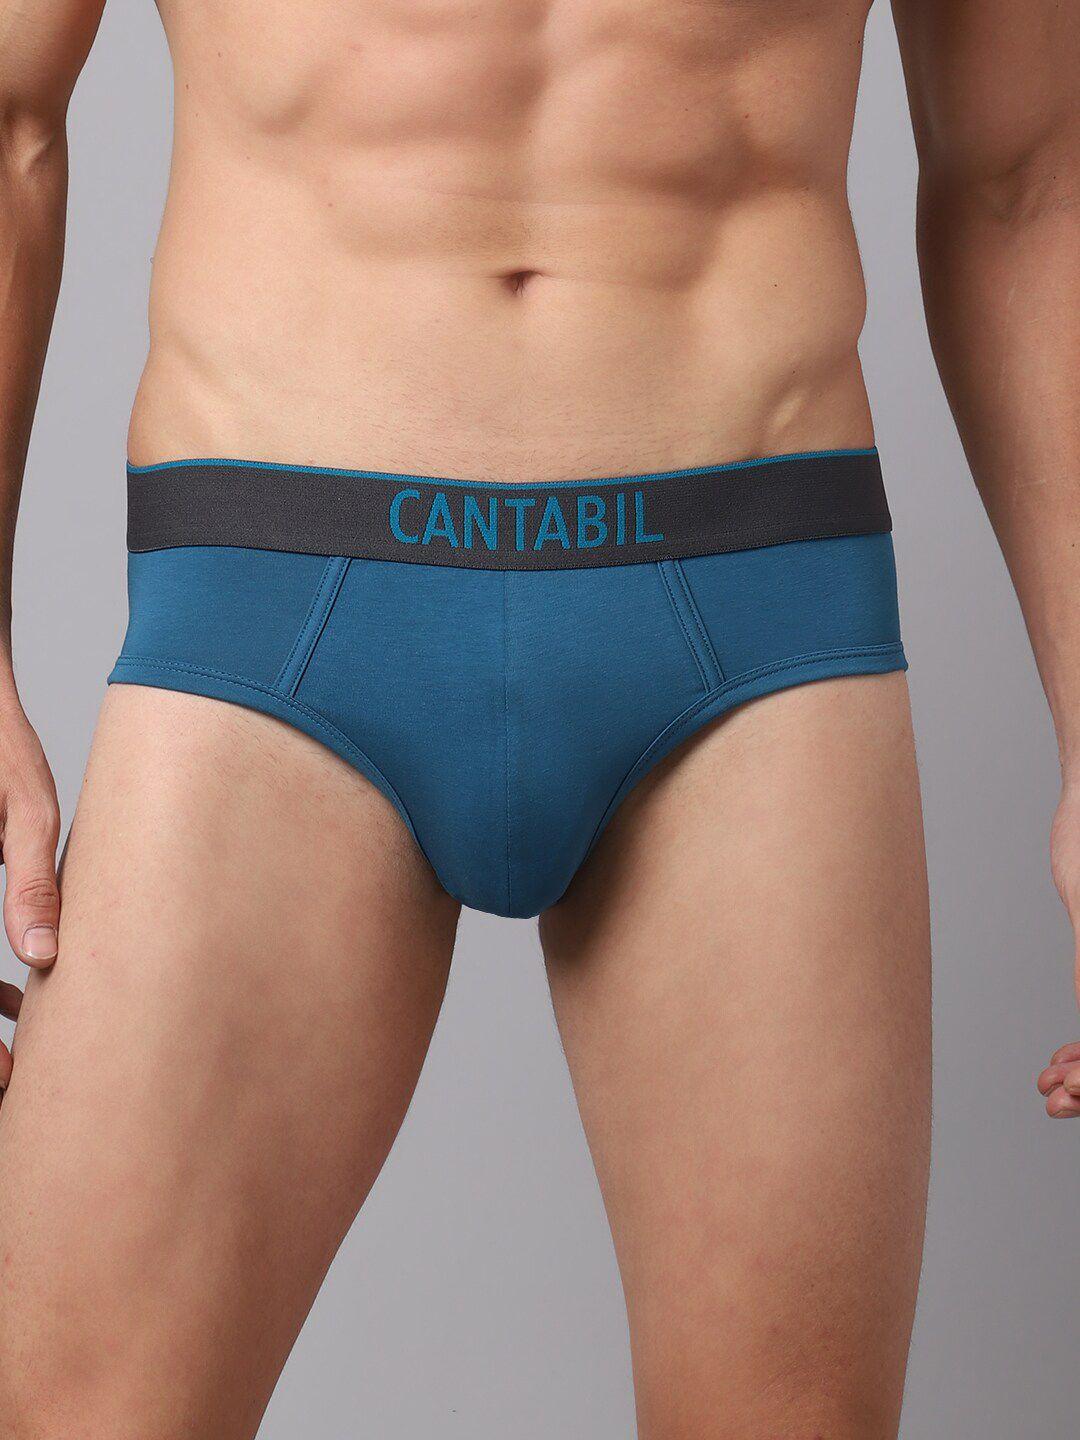 cantabil men pack of 2 teal solid briefs mbrf00016_teal